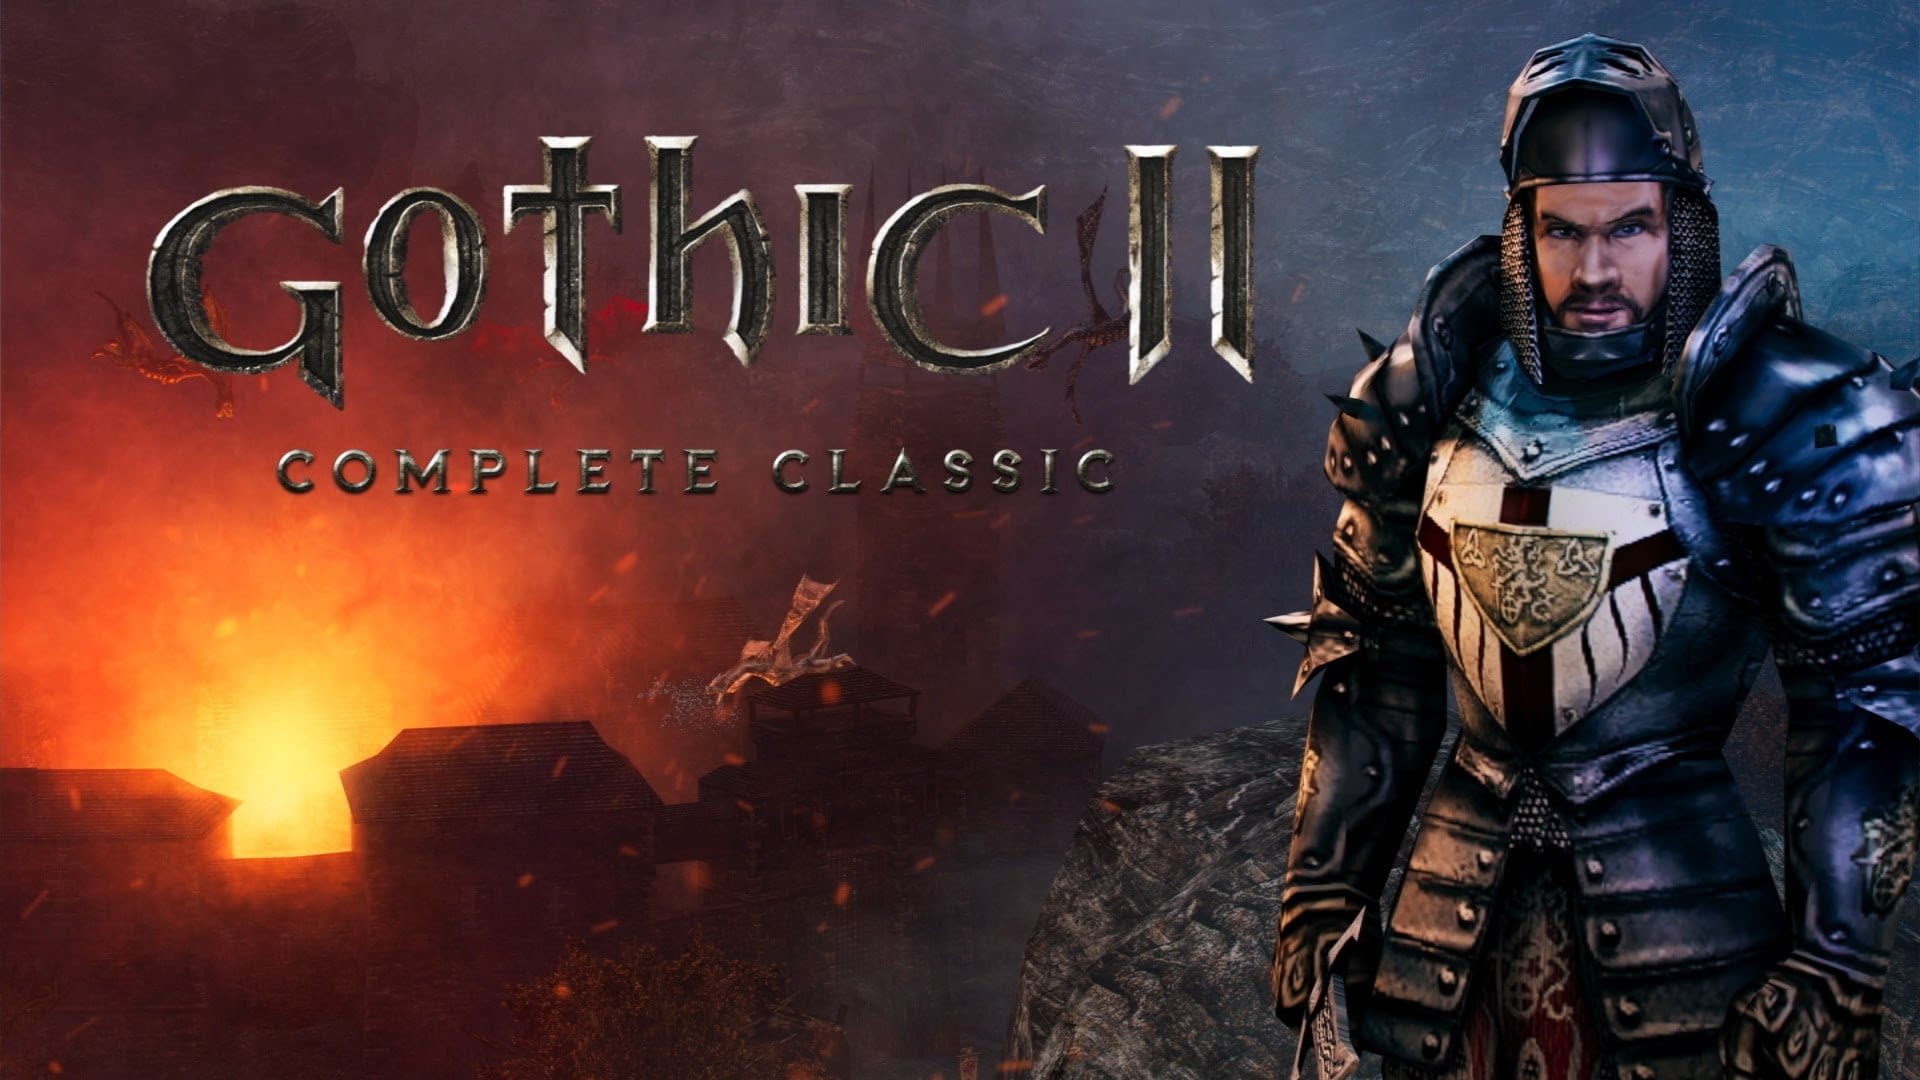 Announcement for the Gothic II Switch Console